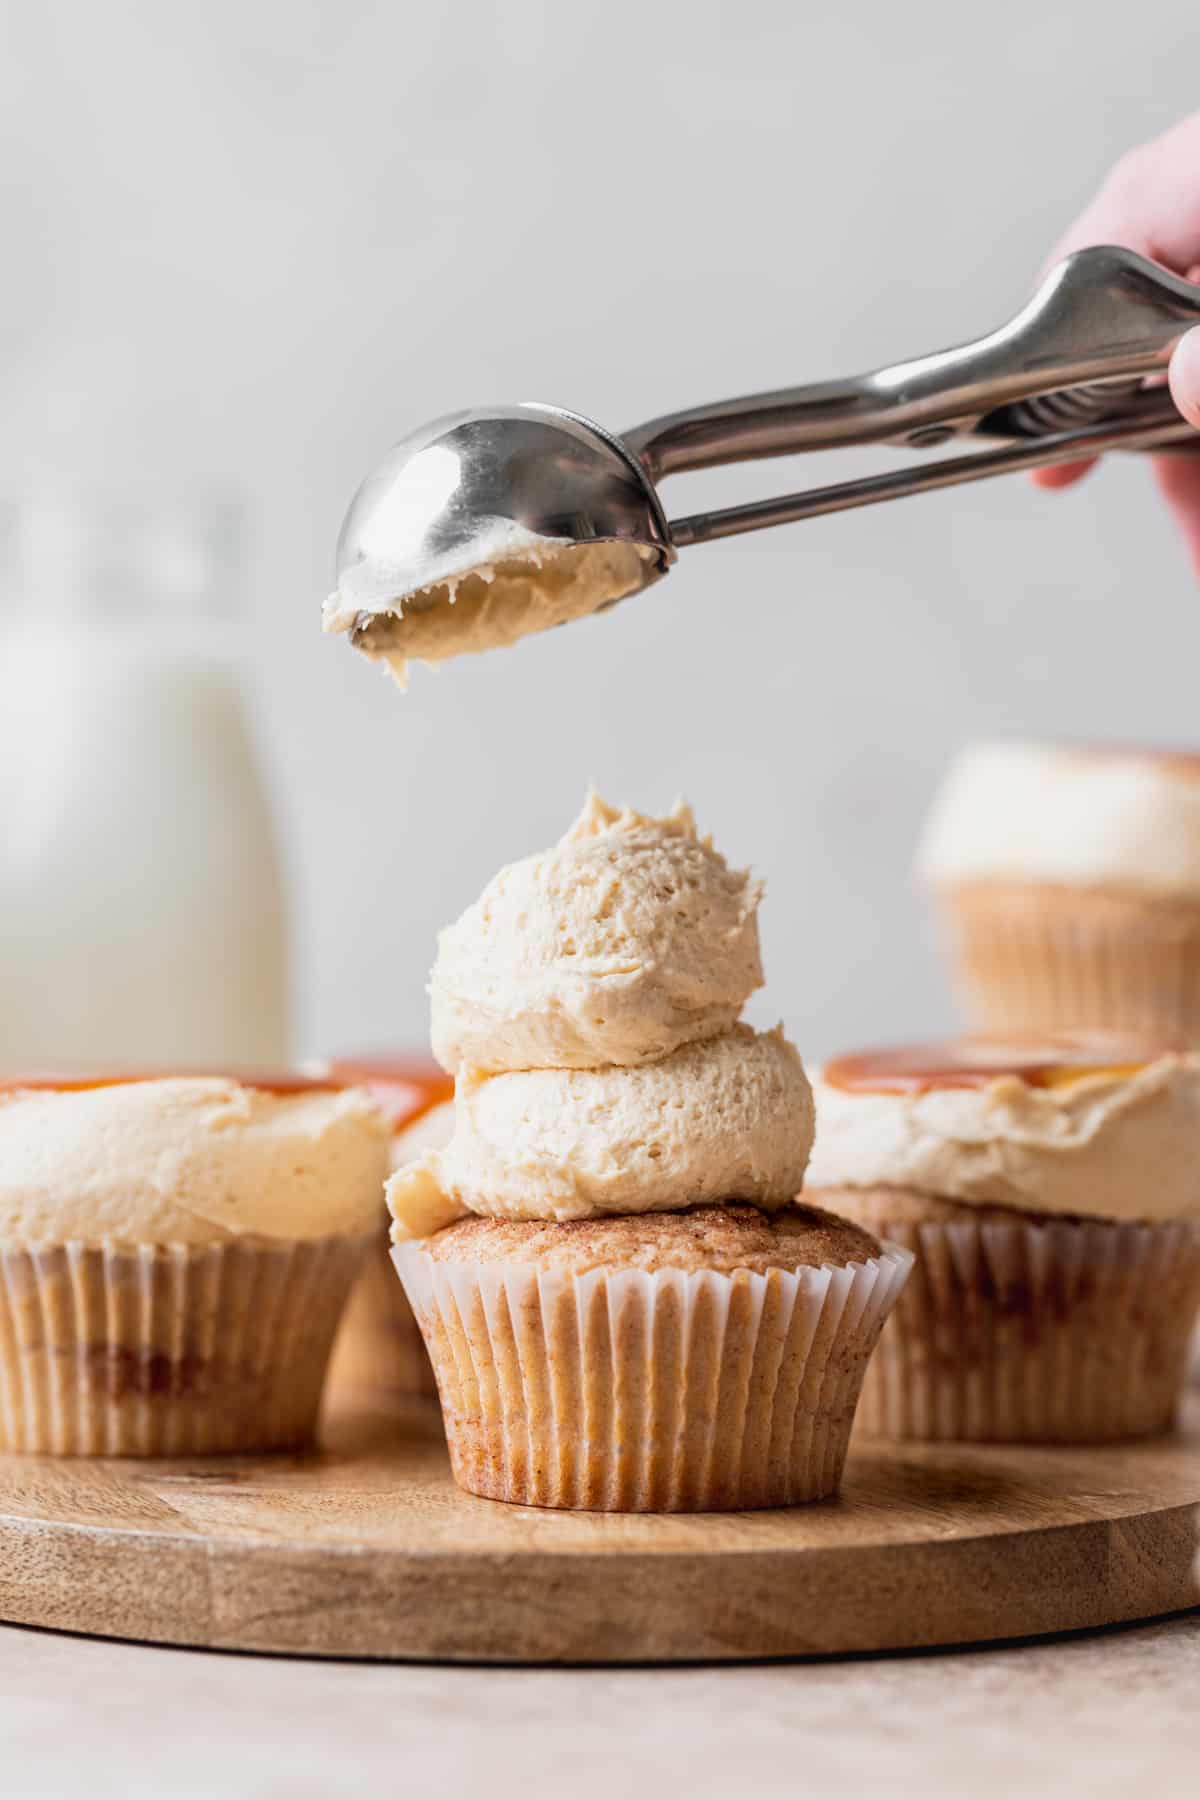 Topping cupcakes with caramel frosting.